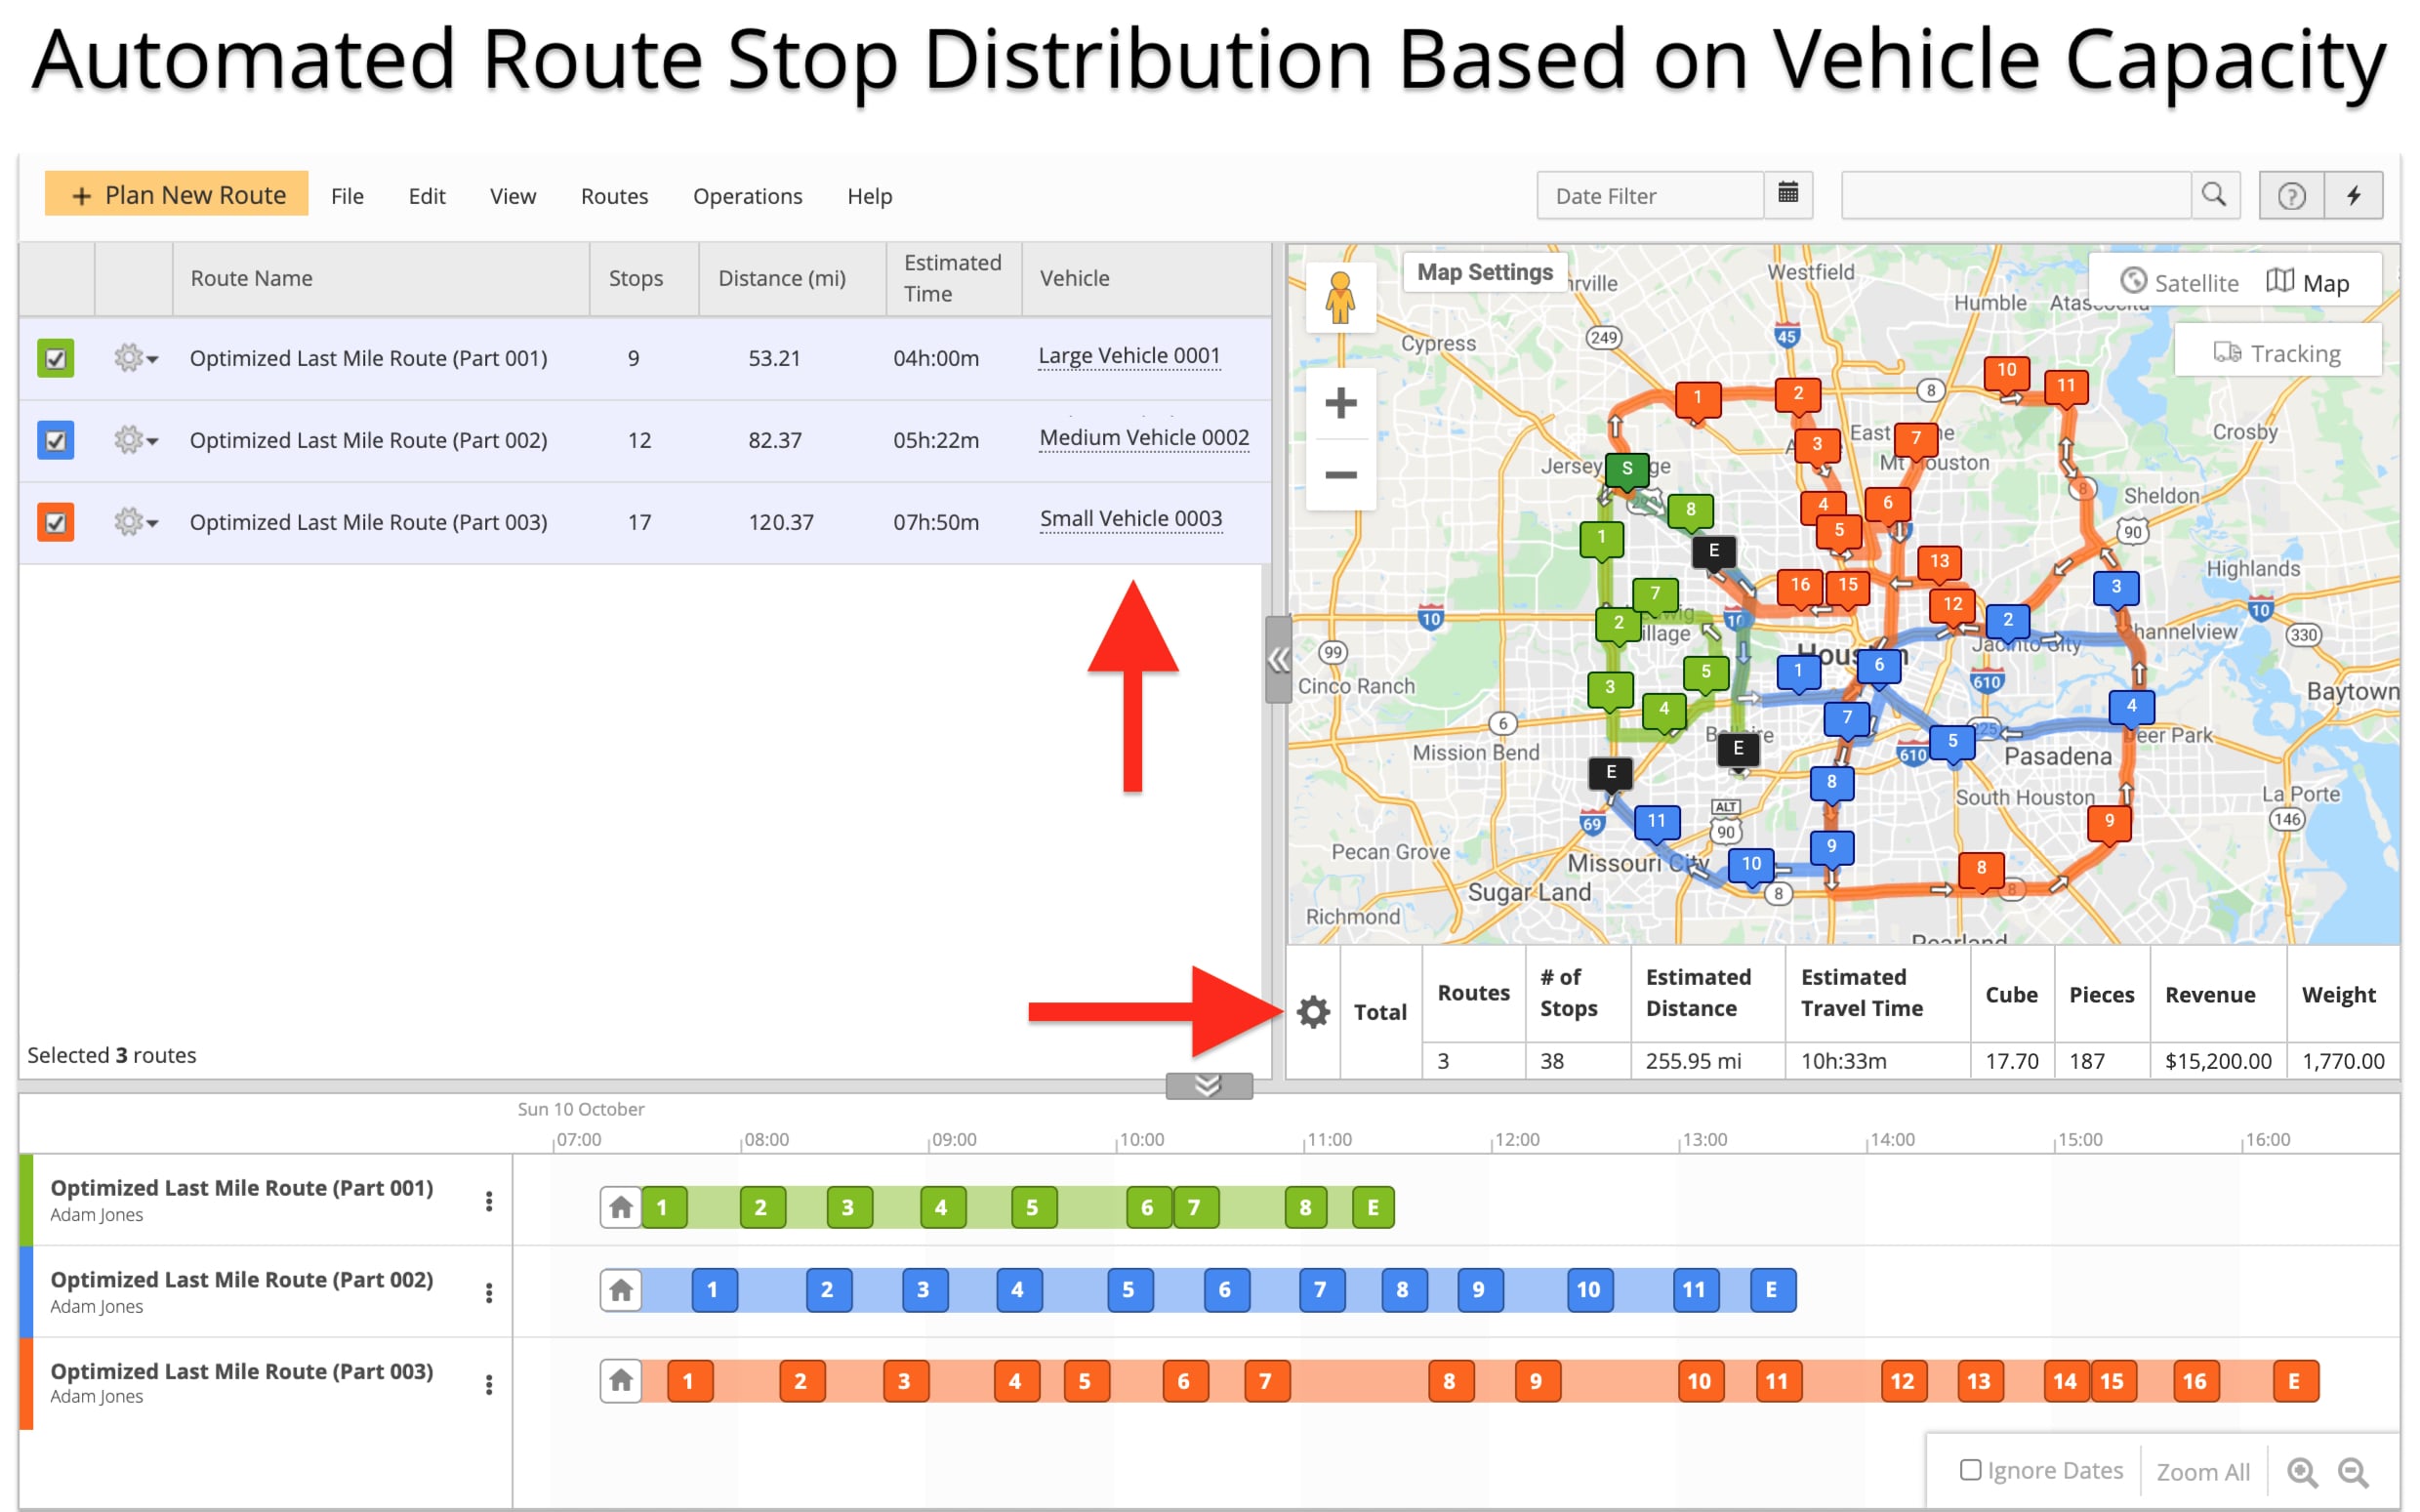 Automated route stop distribution based on vehicle load capacity and fleet parameters.